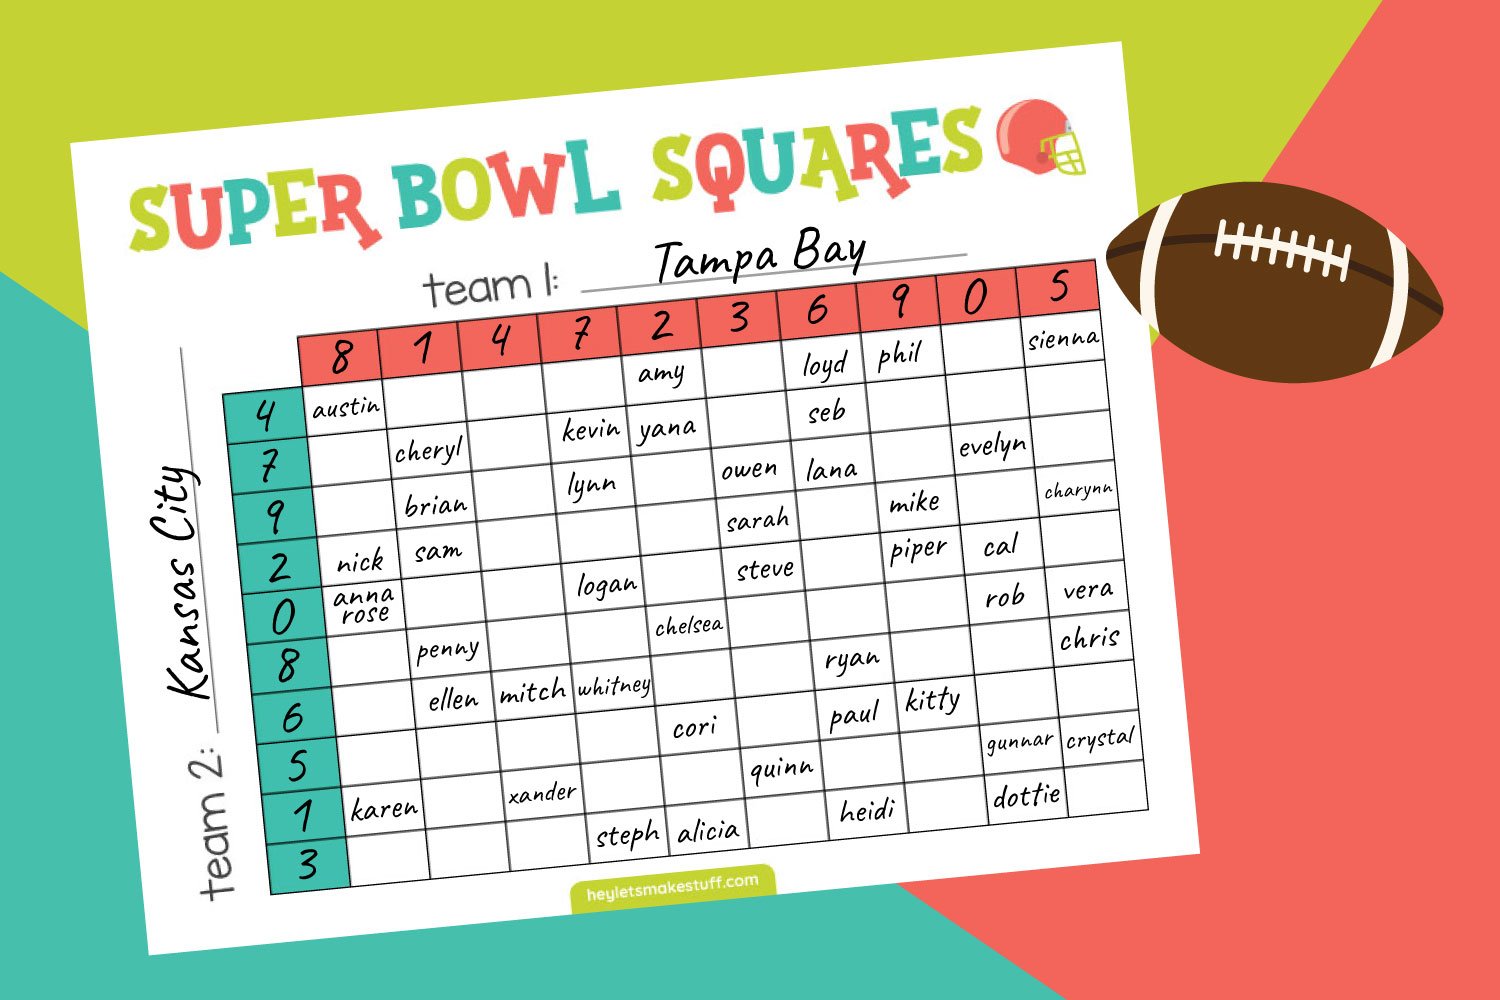 Mockup of Superbowl Squares game on teal, green, and pink background